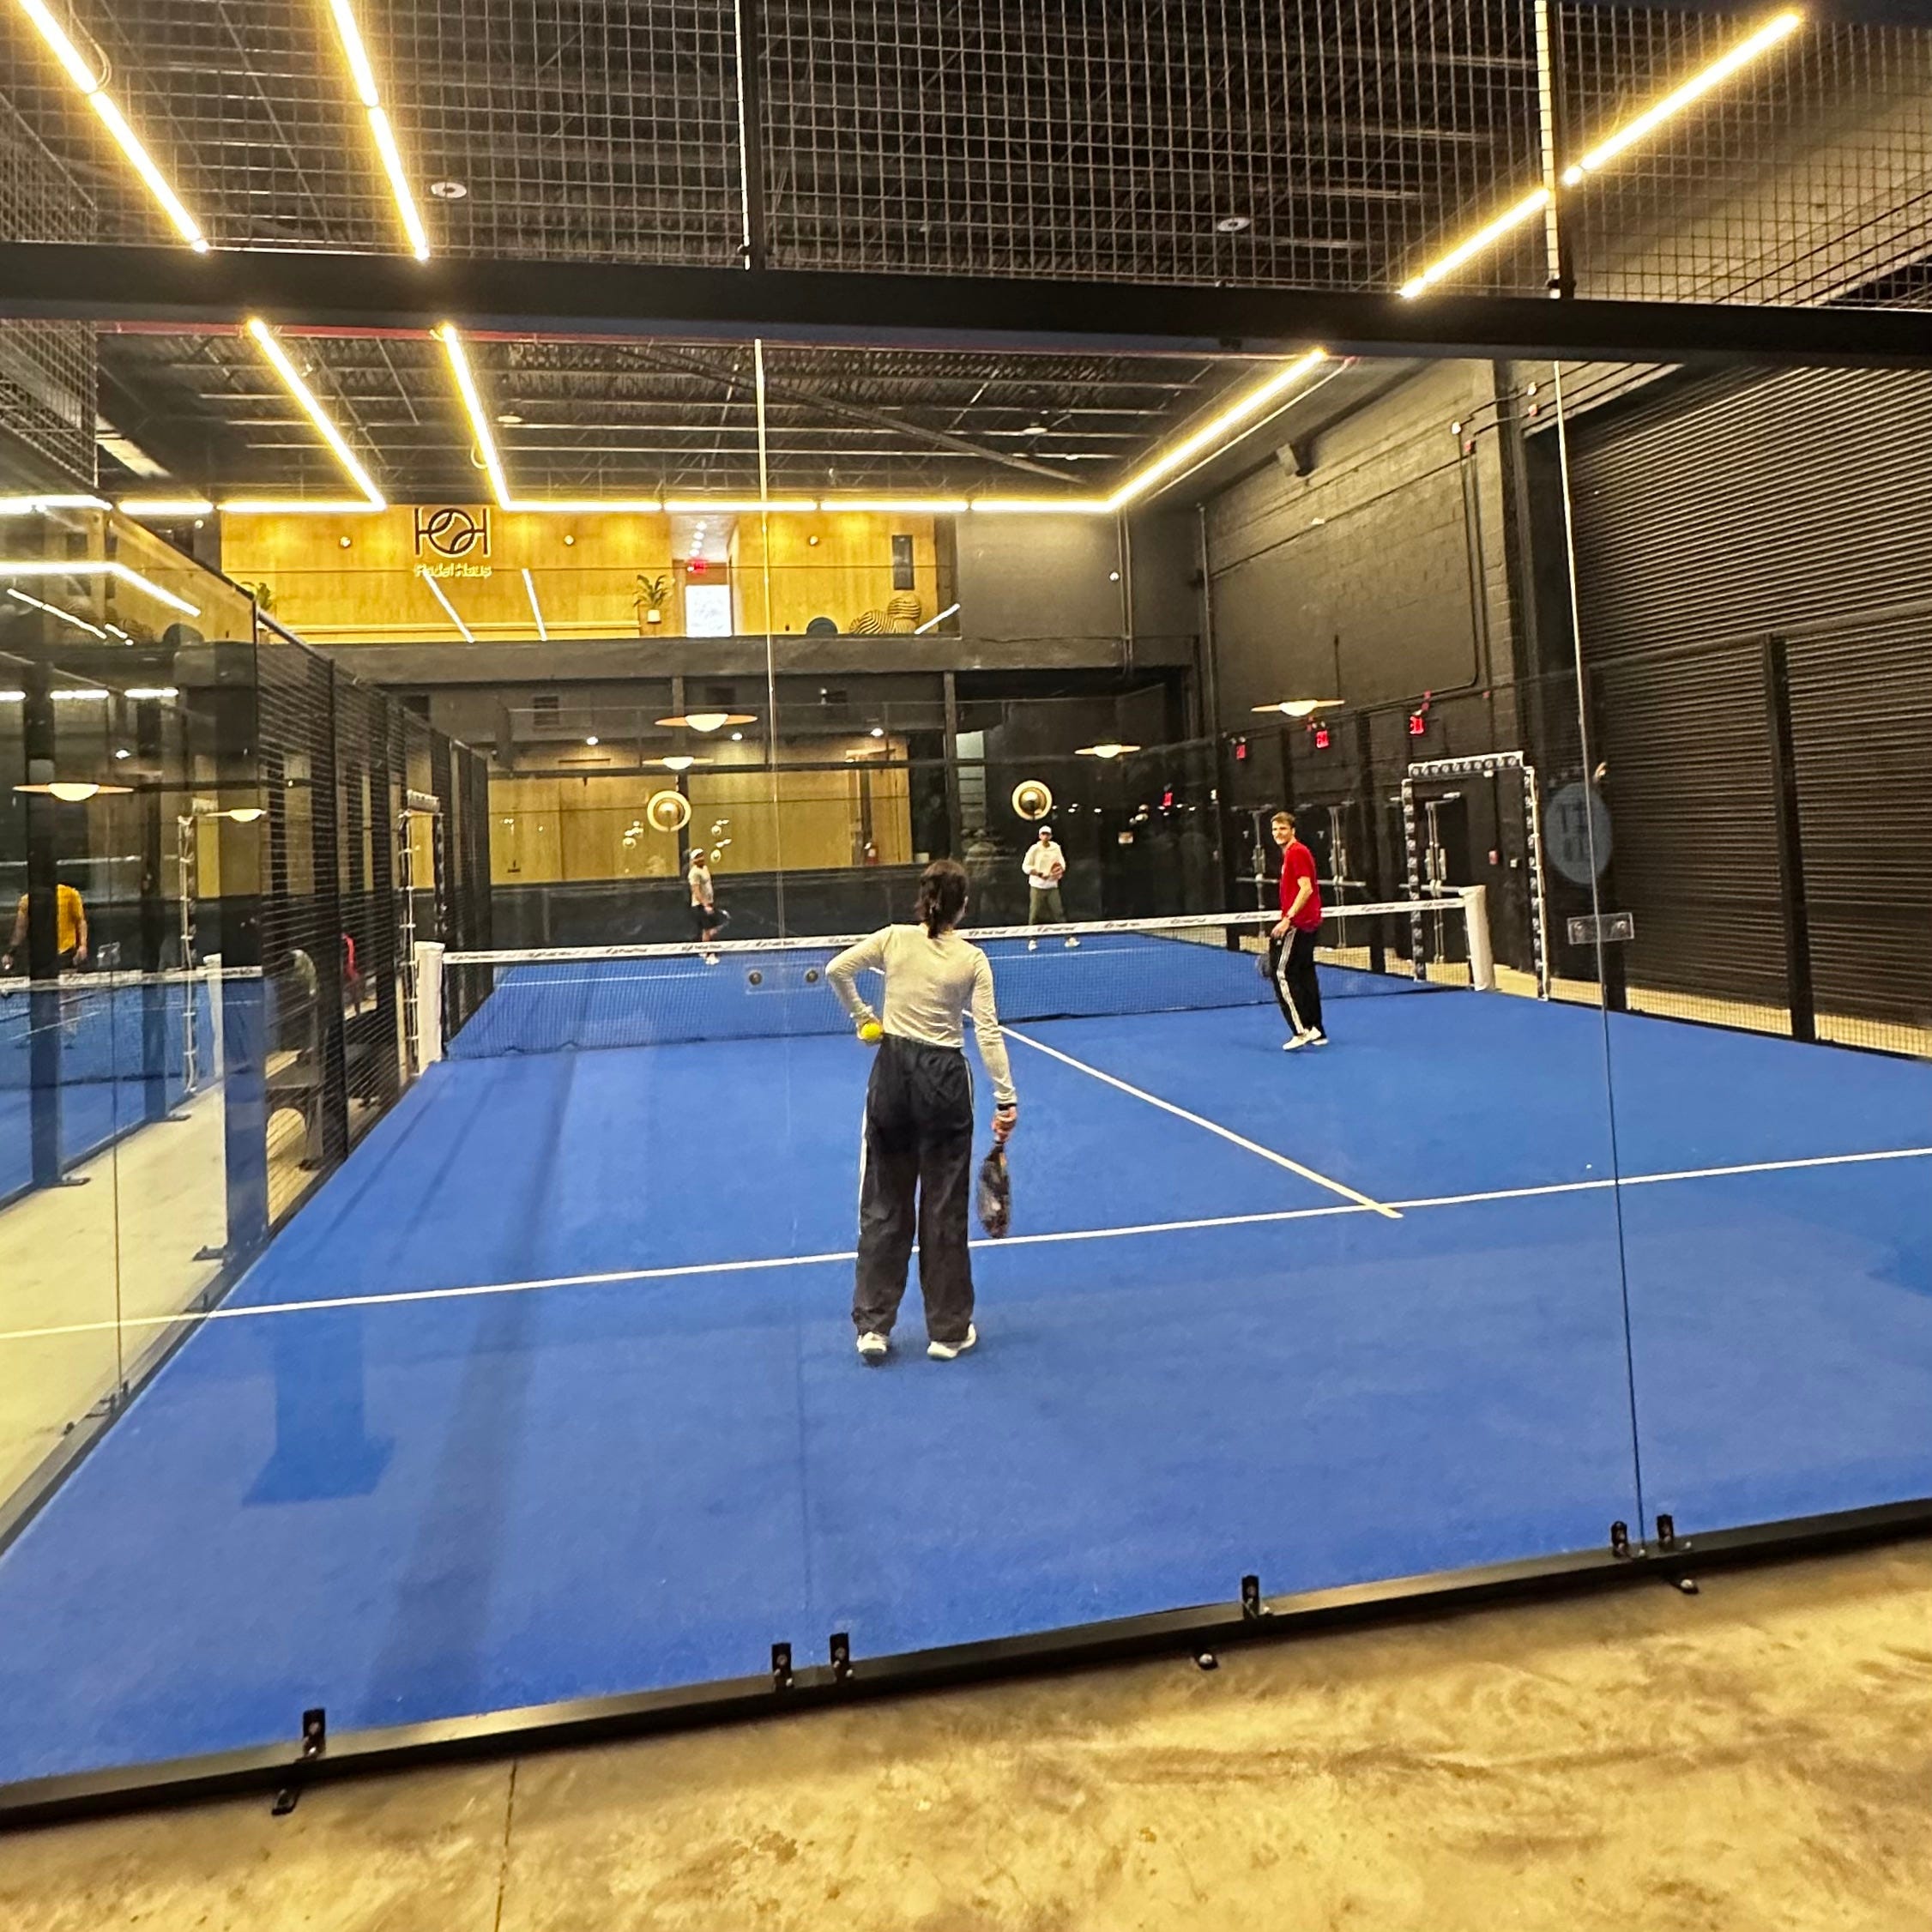 <p>It's played in doubles with rackets that look like a cross between a pickleball paddle and a squash racket.</p><p>The sport originated in Mexico when a businessman named Enrique Corcuera built the first padel court at his home in Acapulco. It eventually made its way to Spain — gaining popularity among affluent Europeans, BoF reported. It's now gaining a foothold in the US; Padel Haus, for example, is expanding from its NYC locations to Nashville and Denver.</p>